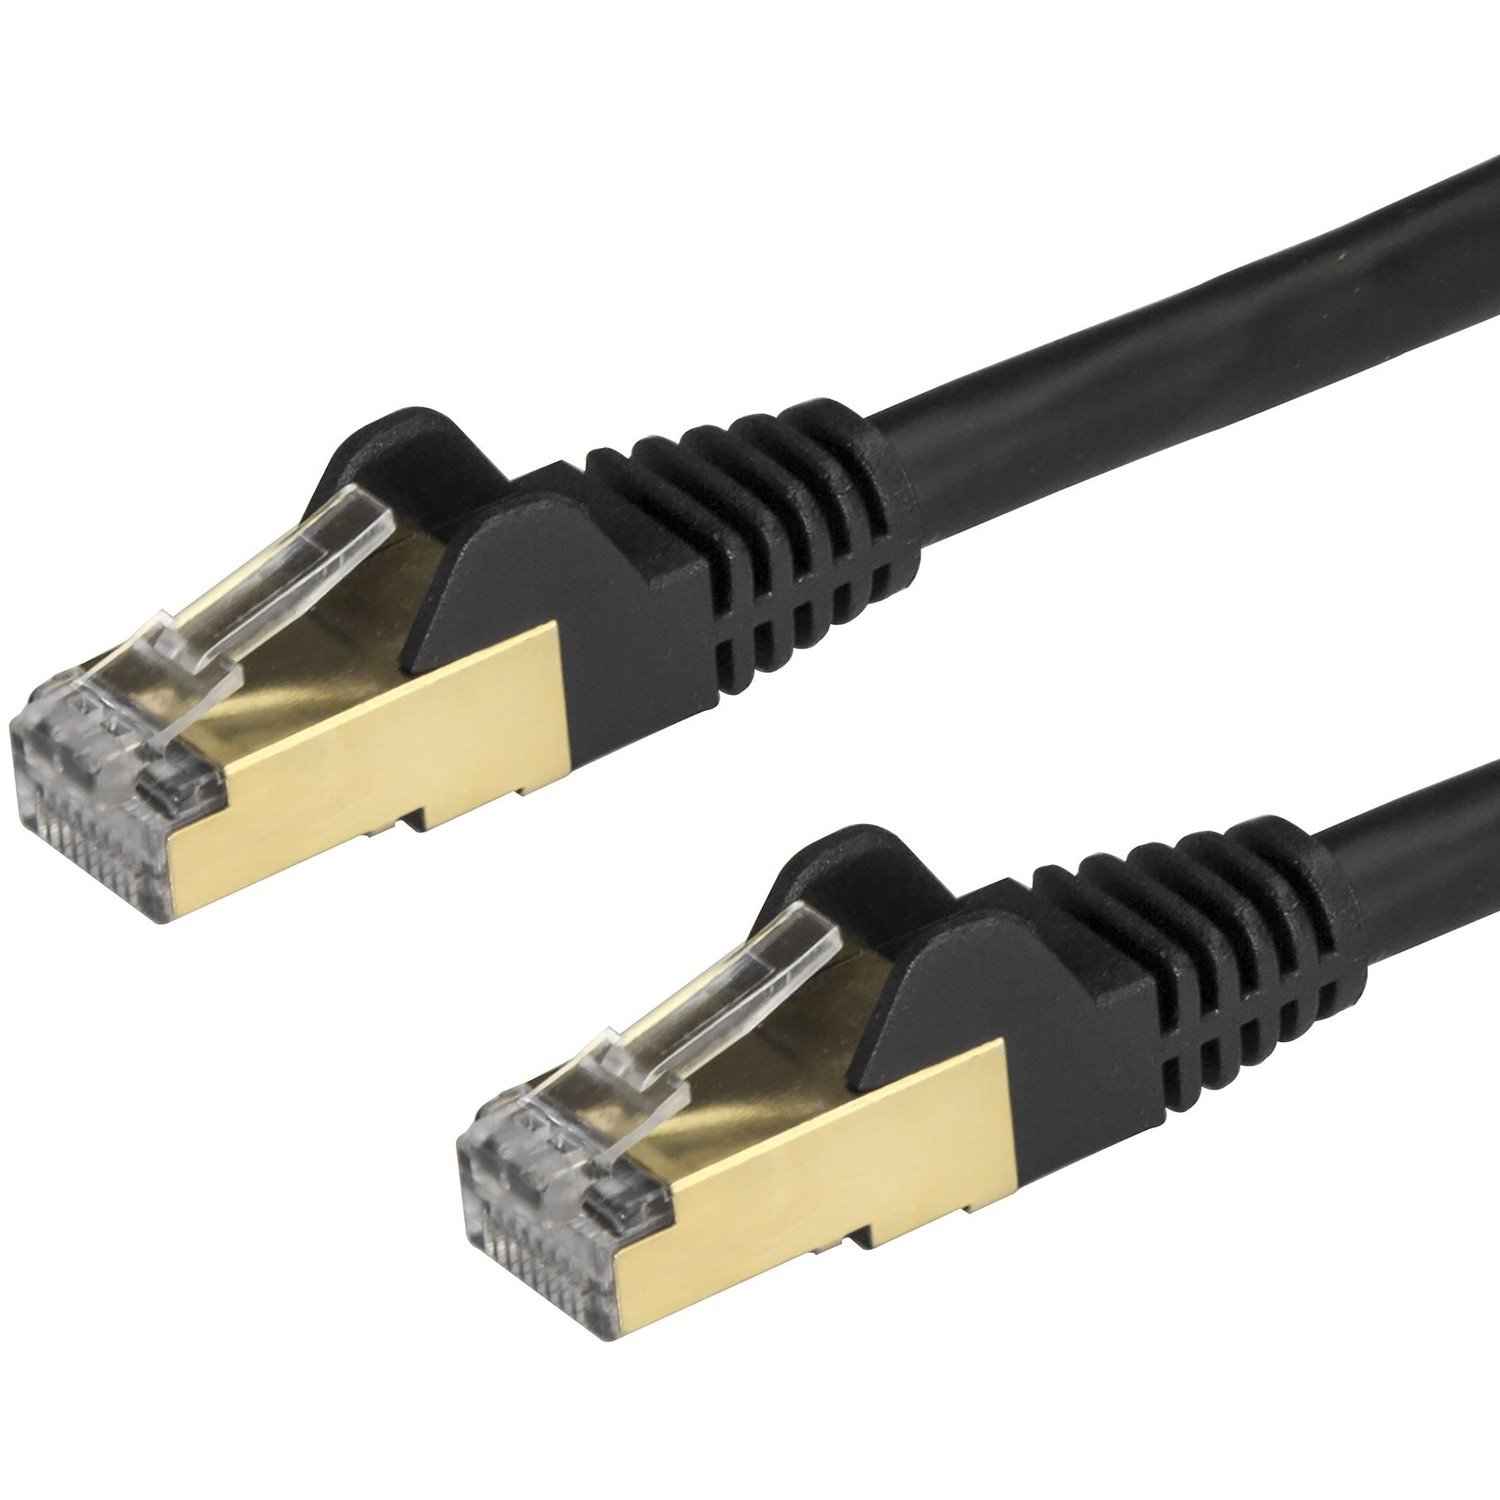 StarTech.com 50 cm Category 6a Network Cable for PoE-enabled Device, Computer, Hub, Router, Patch Panel - 1